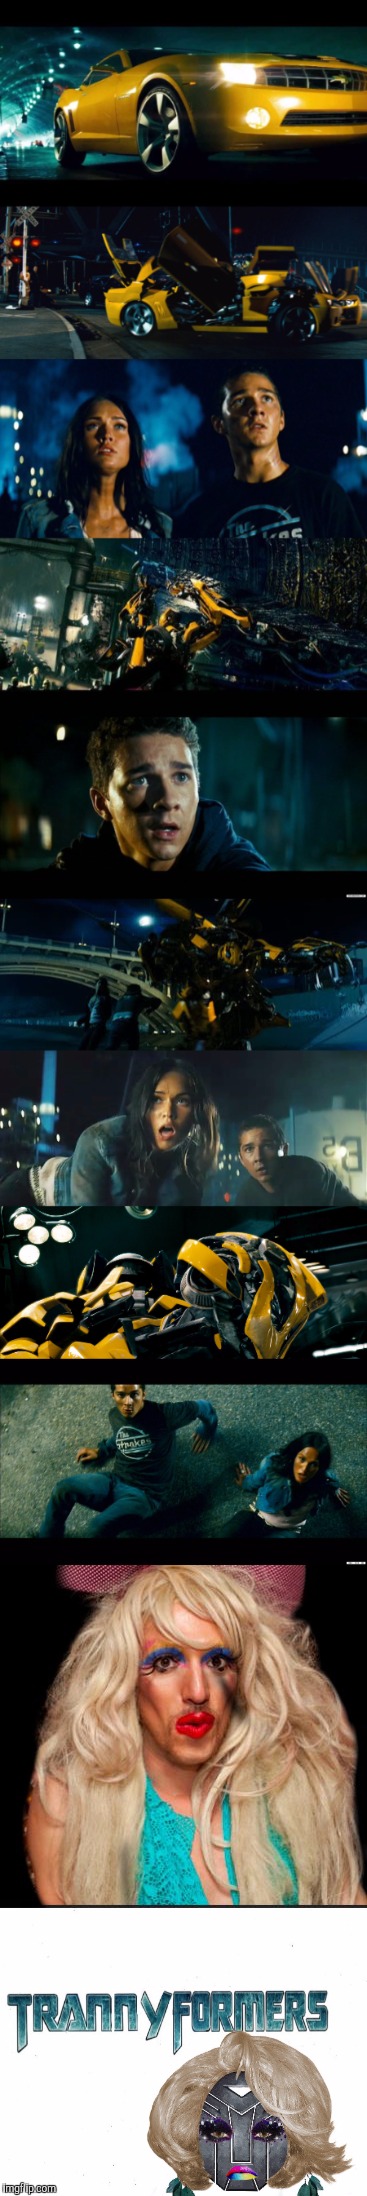 BUMBLEQUEEN | . | image tagged in transformers,transsexual,funny | made w/ Imgflip meme maker